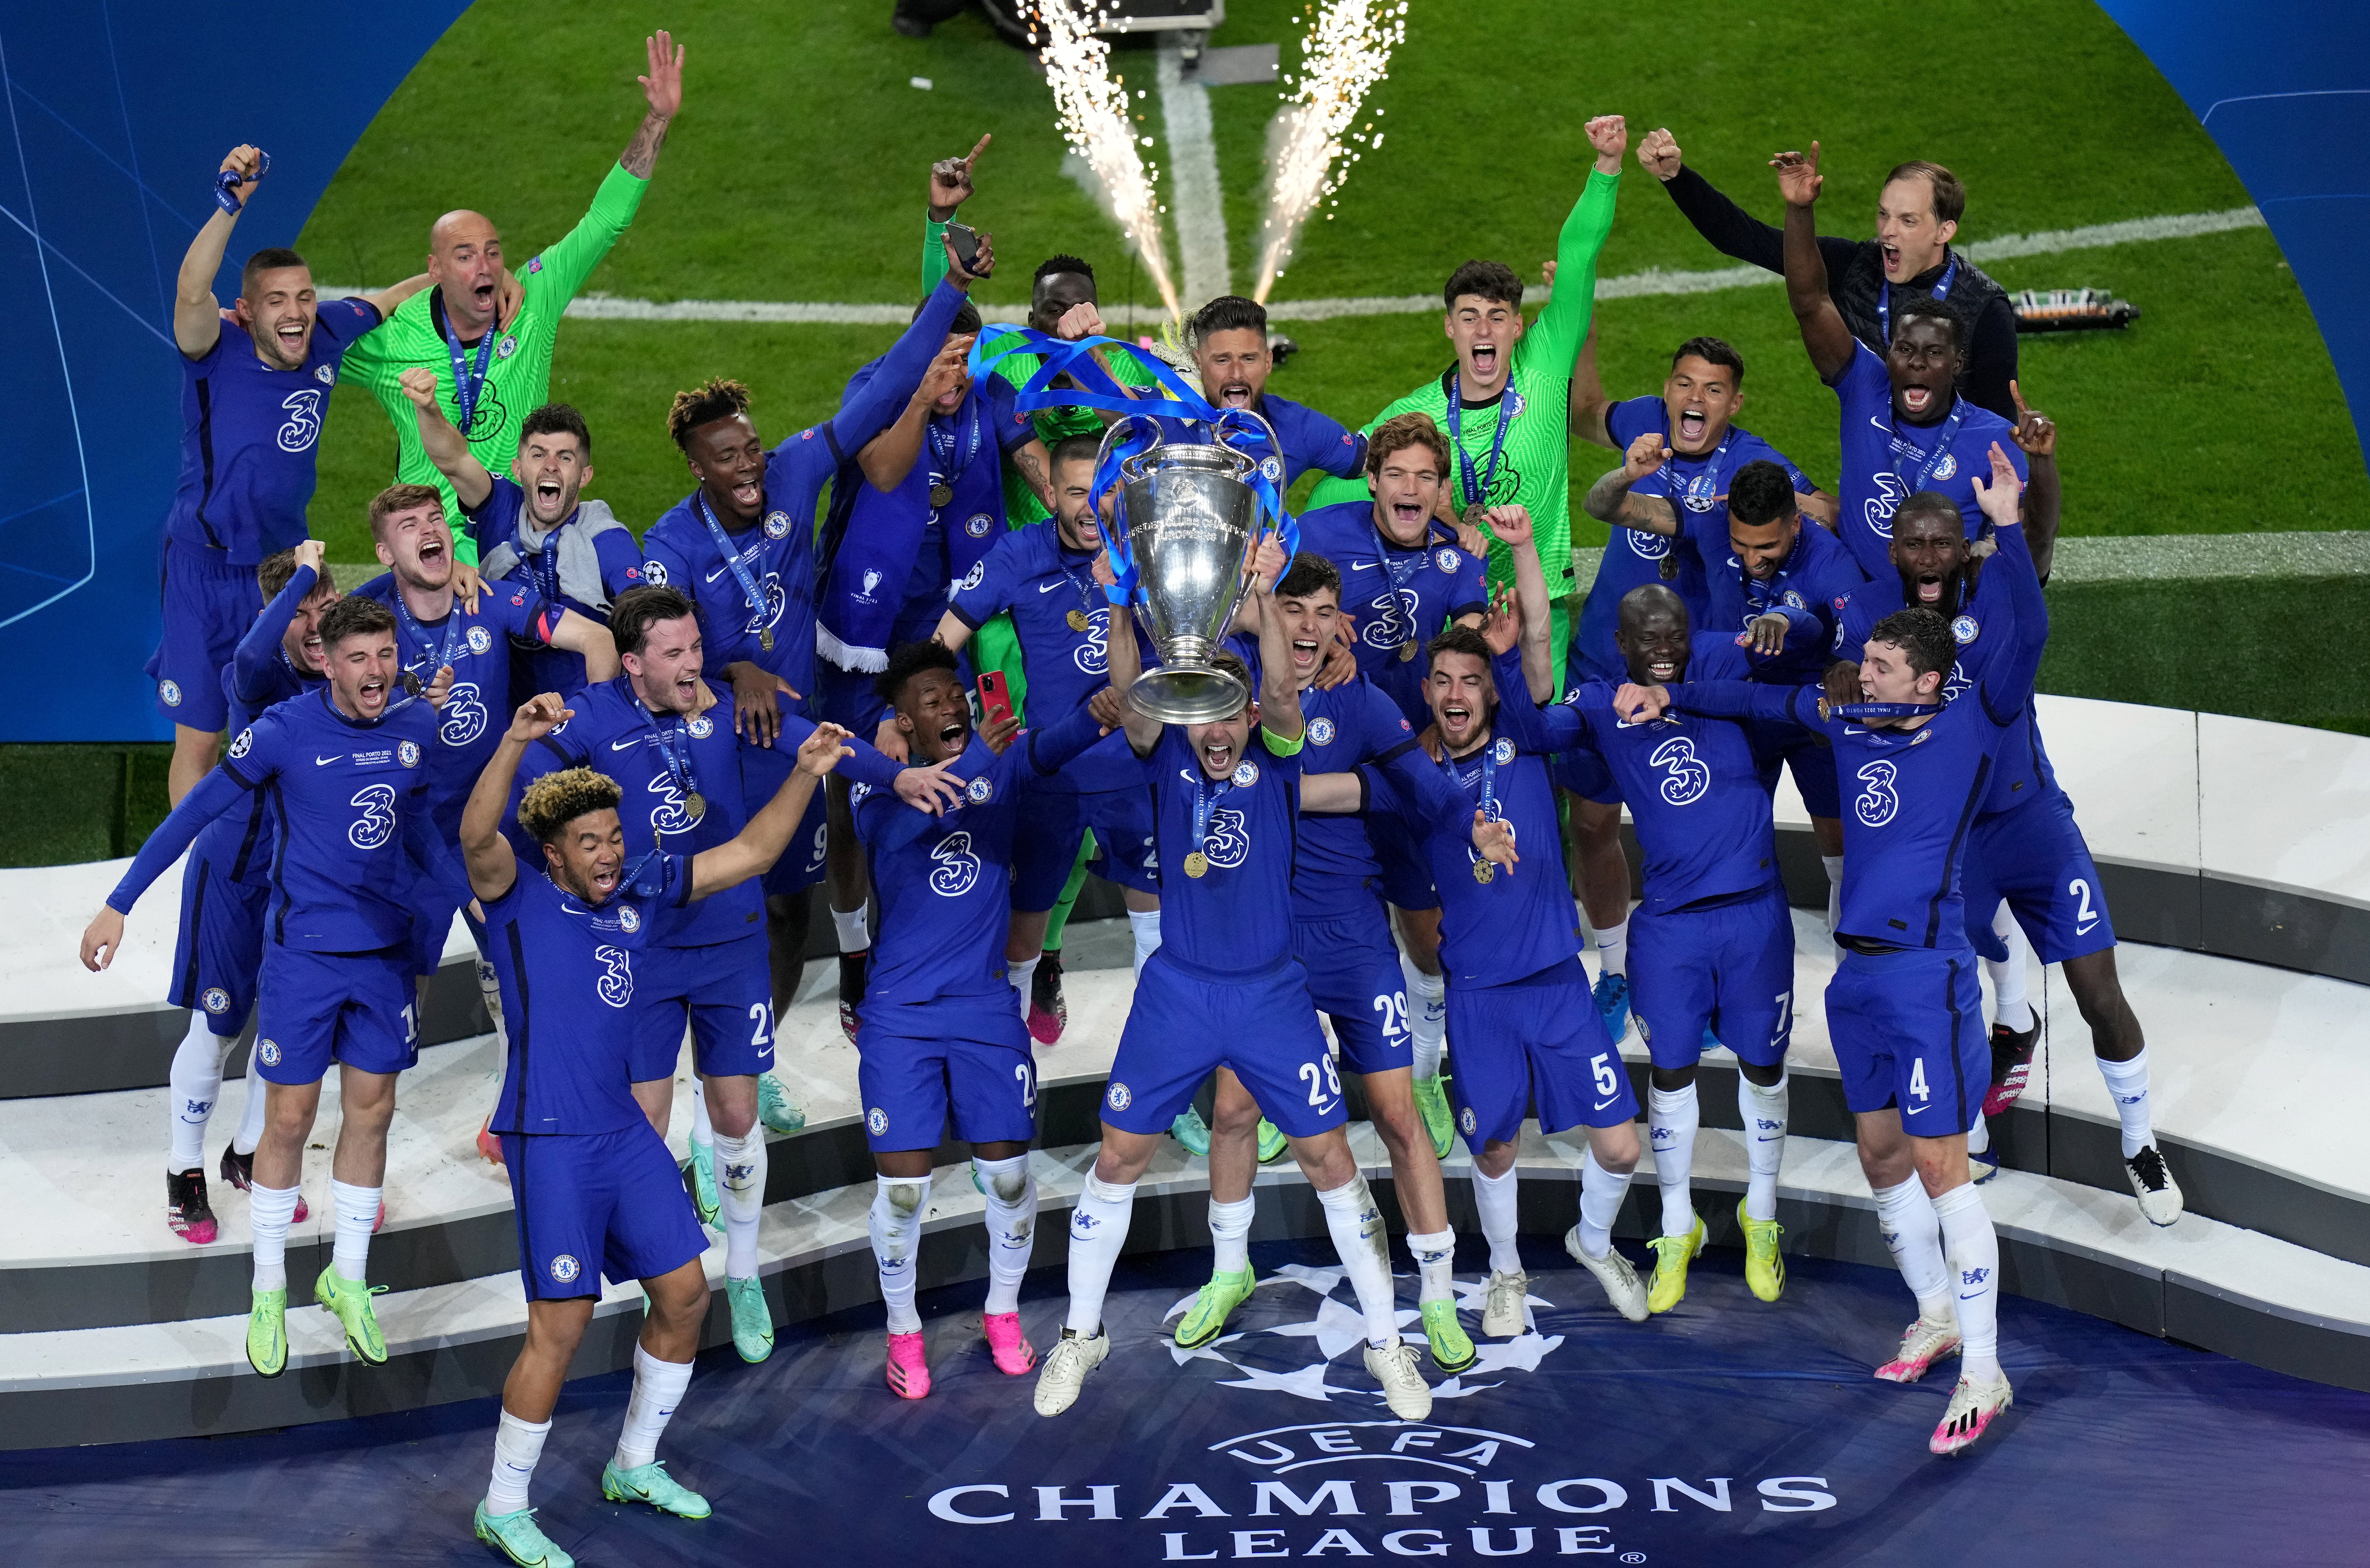 Chelsea celebrate Champions League success after beating Manchester City in an all-English final (Adam Davy/PA)